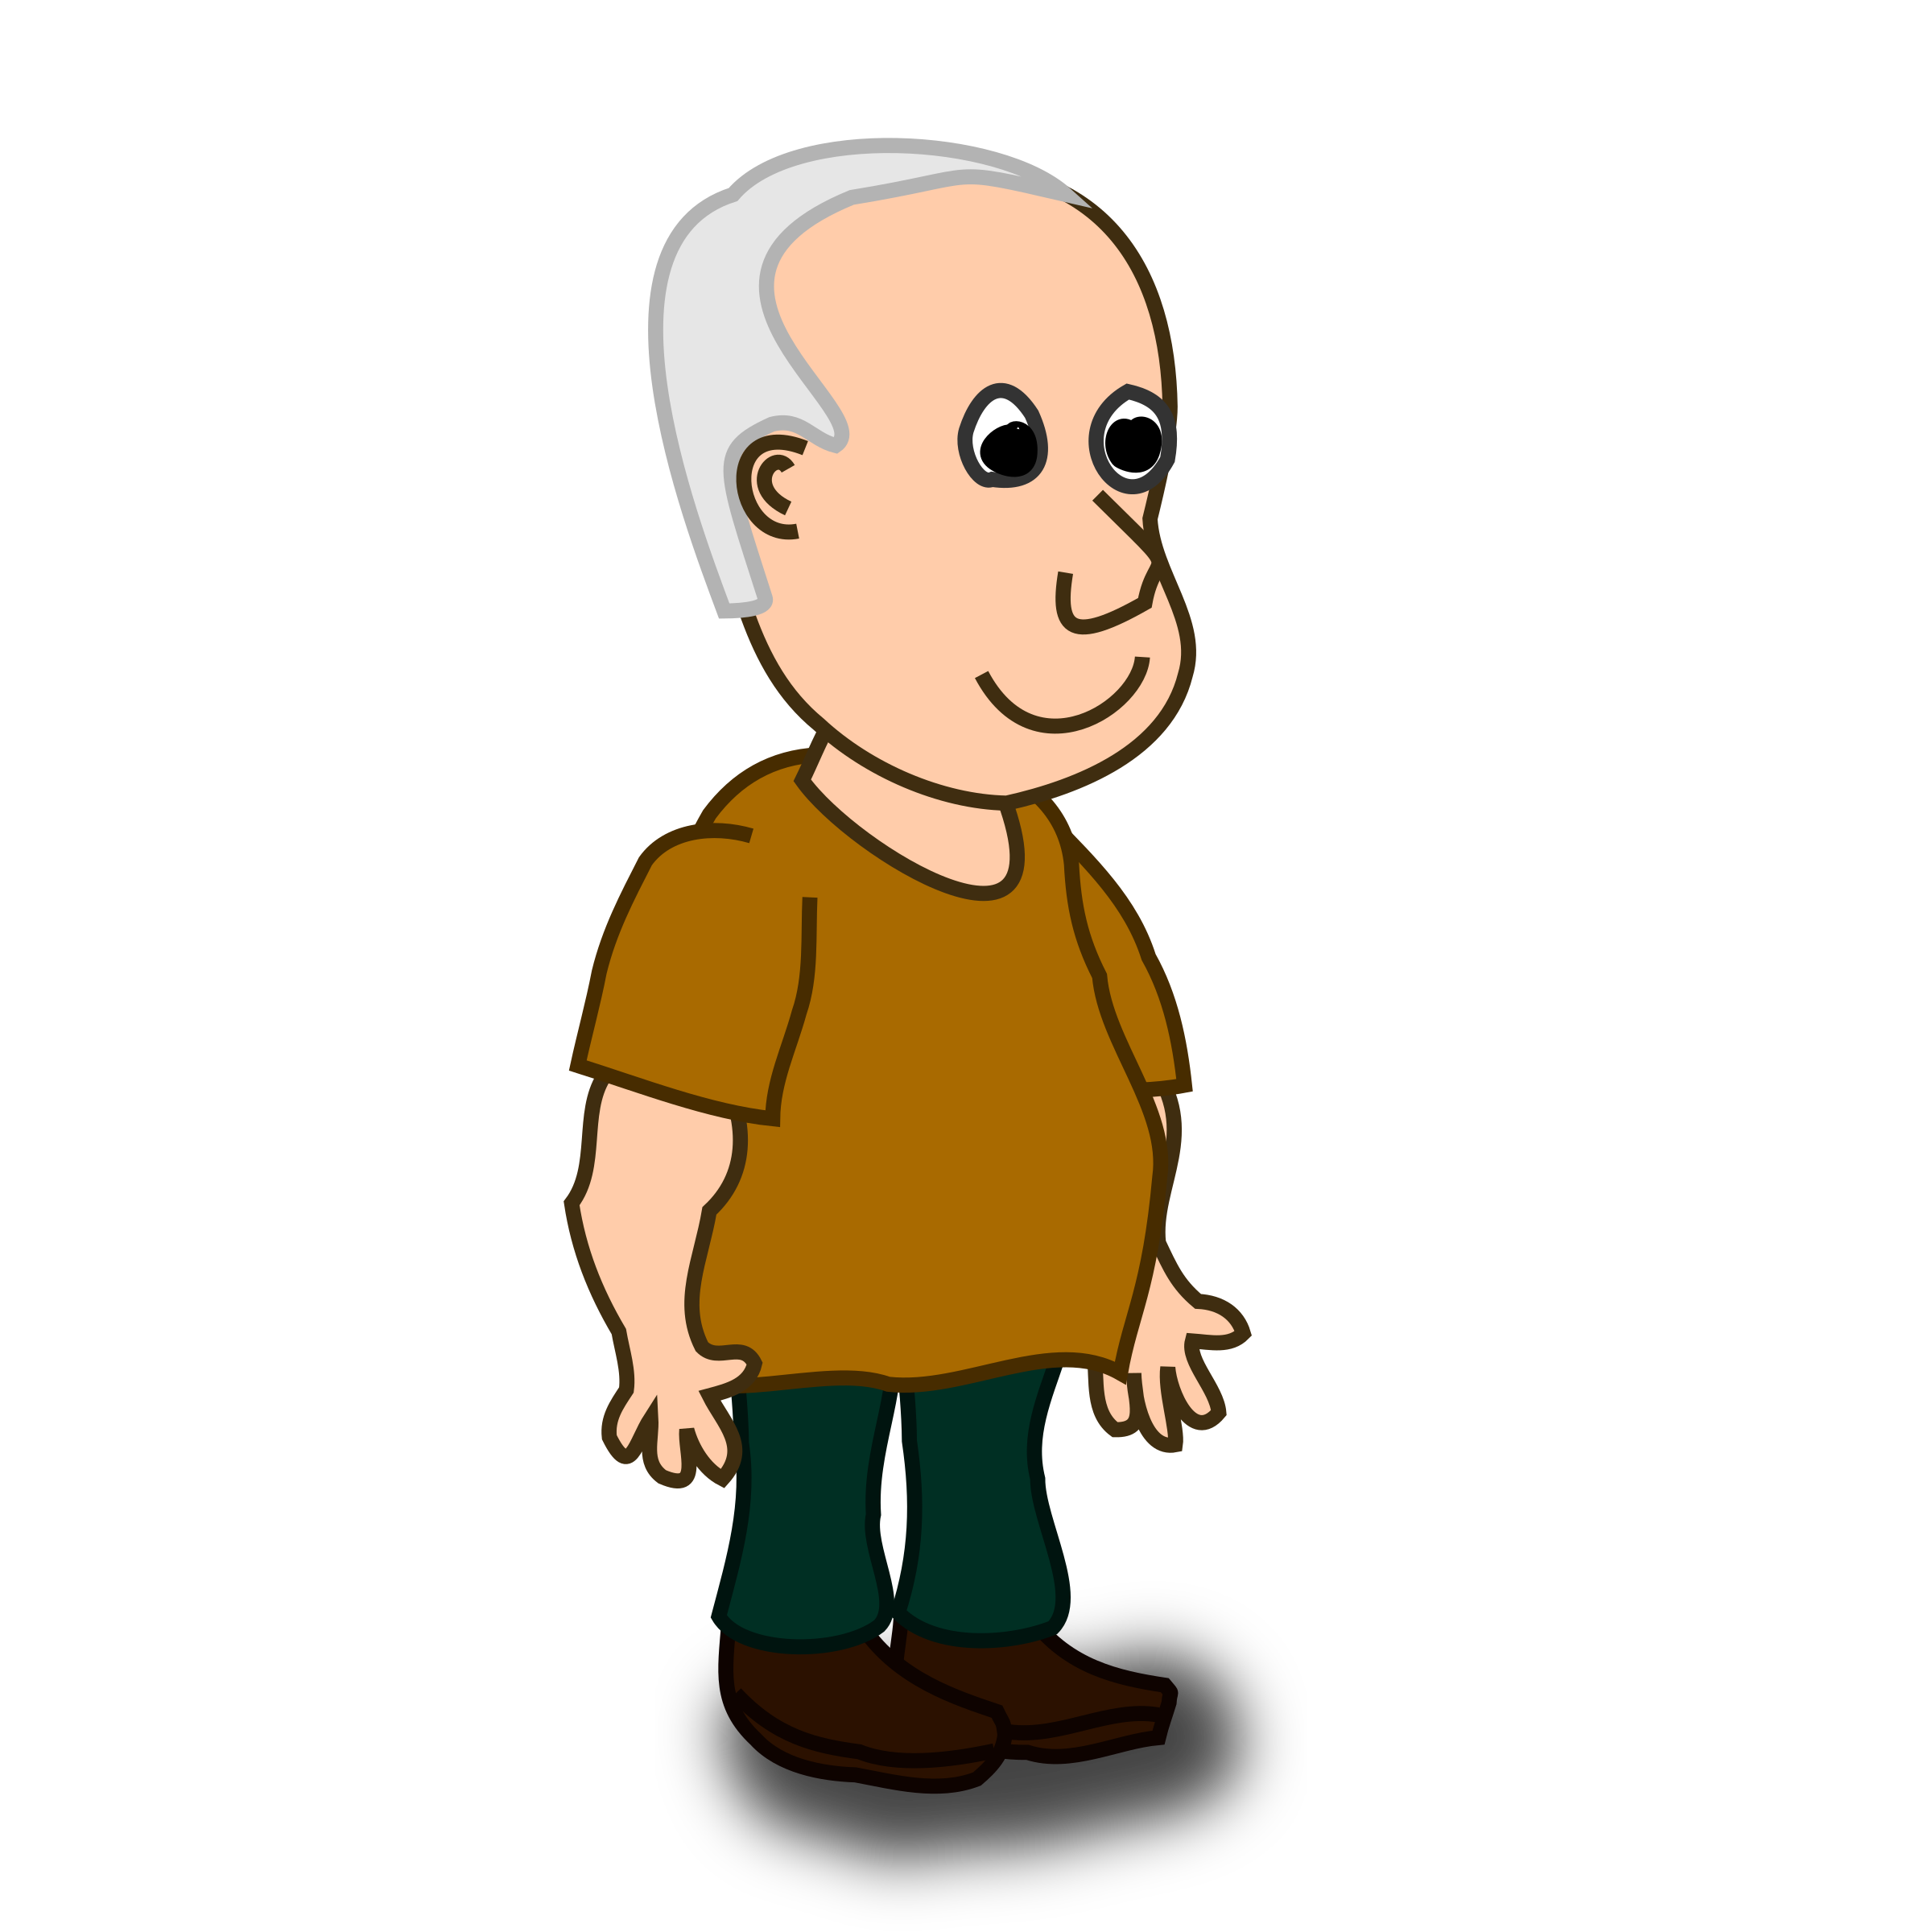 Human Cartoon Clipart | Free download on ClipArtMag